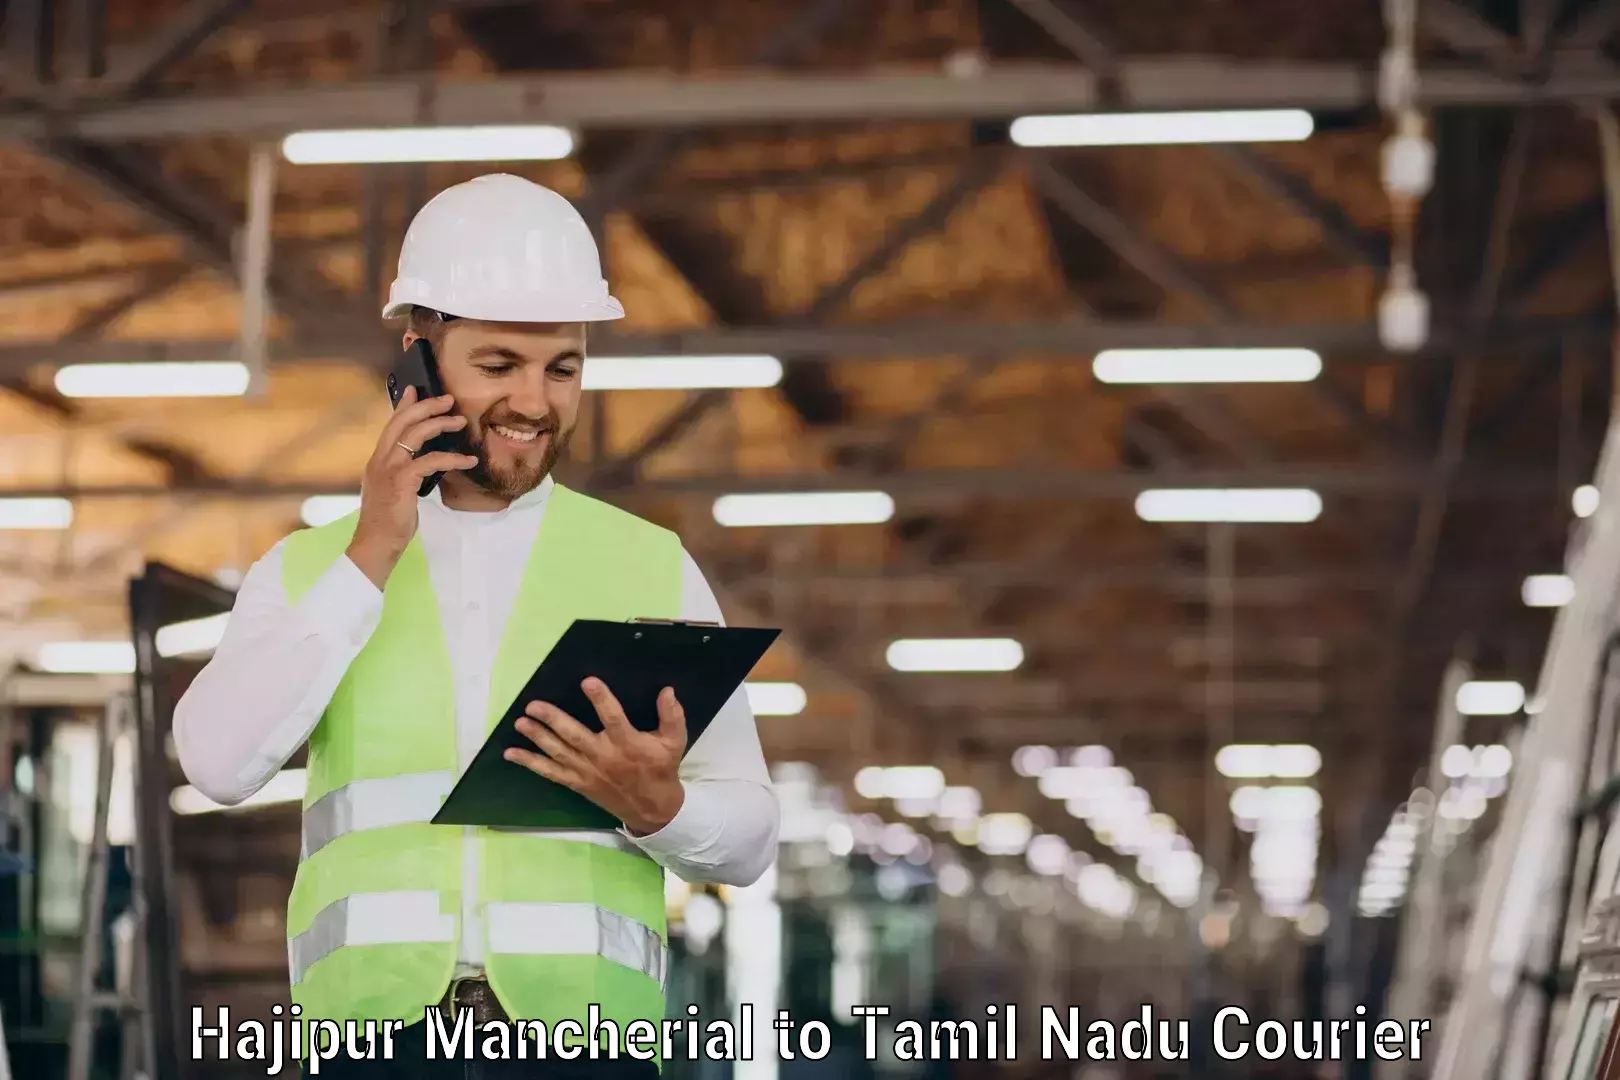 State-of-the-art courier technology Hajipur Mancherial to Kangeyam